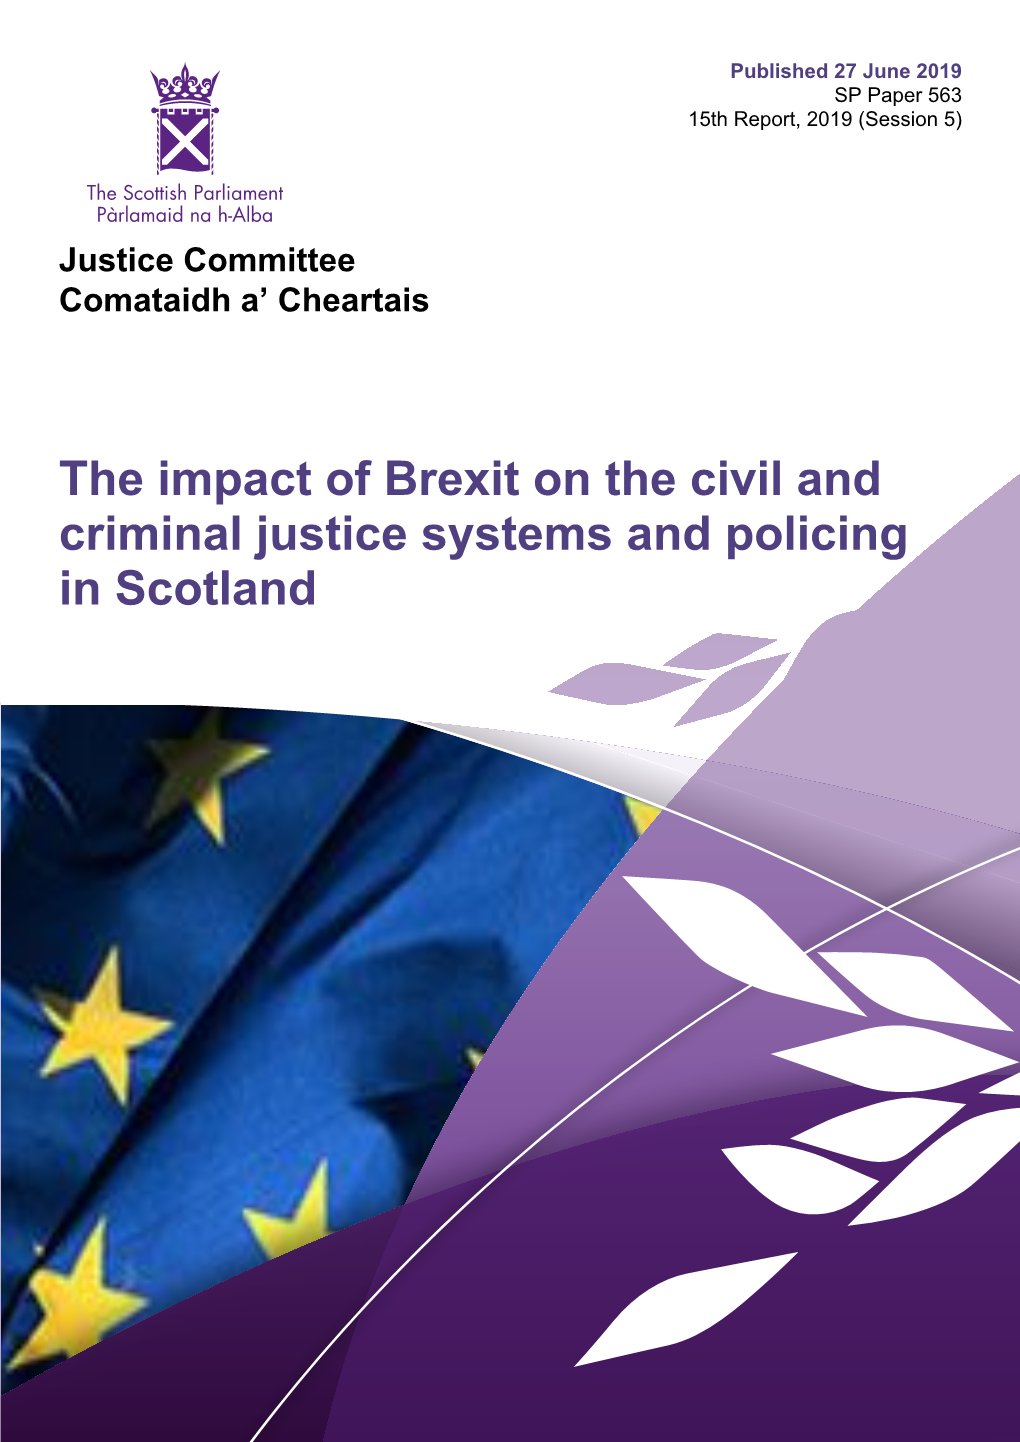 The Impact of Brexit on the Civil and Criminal Justice Systems and Policing in Scotland Published in Scotland by the Scottish Parliamentary Corporate Body